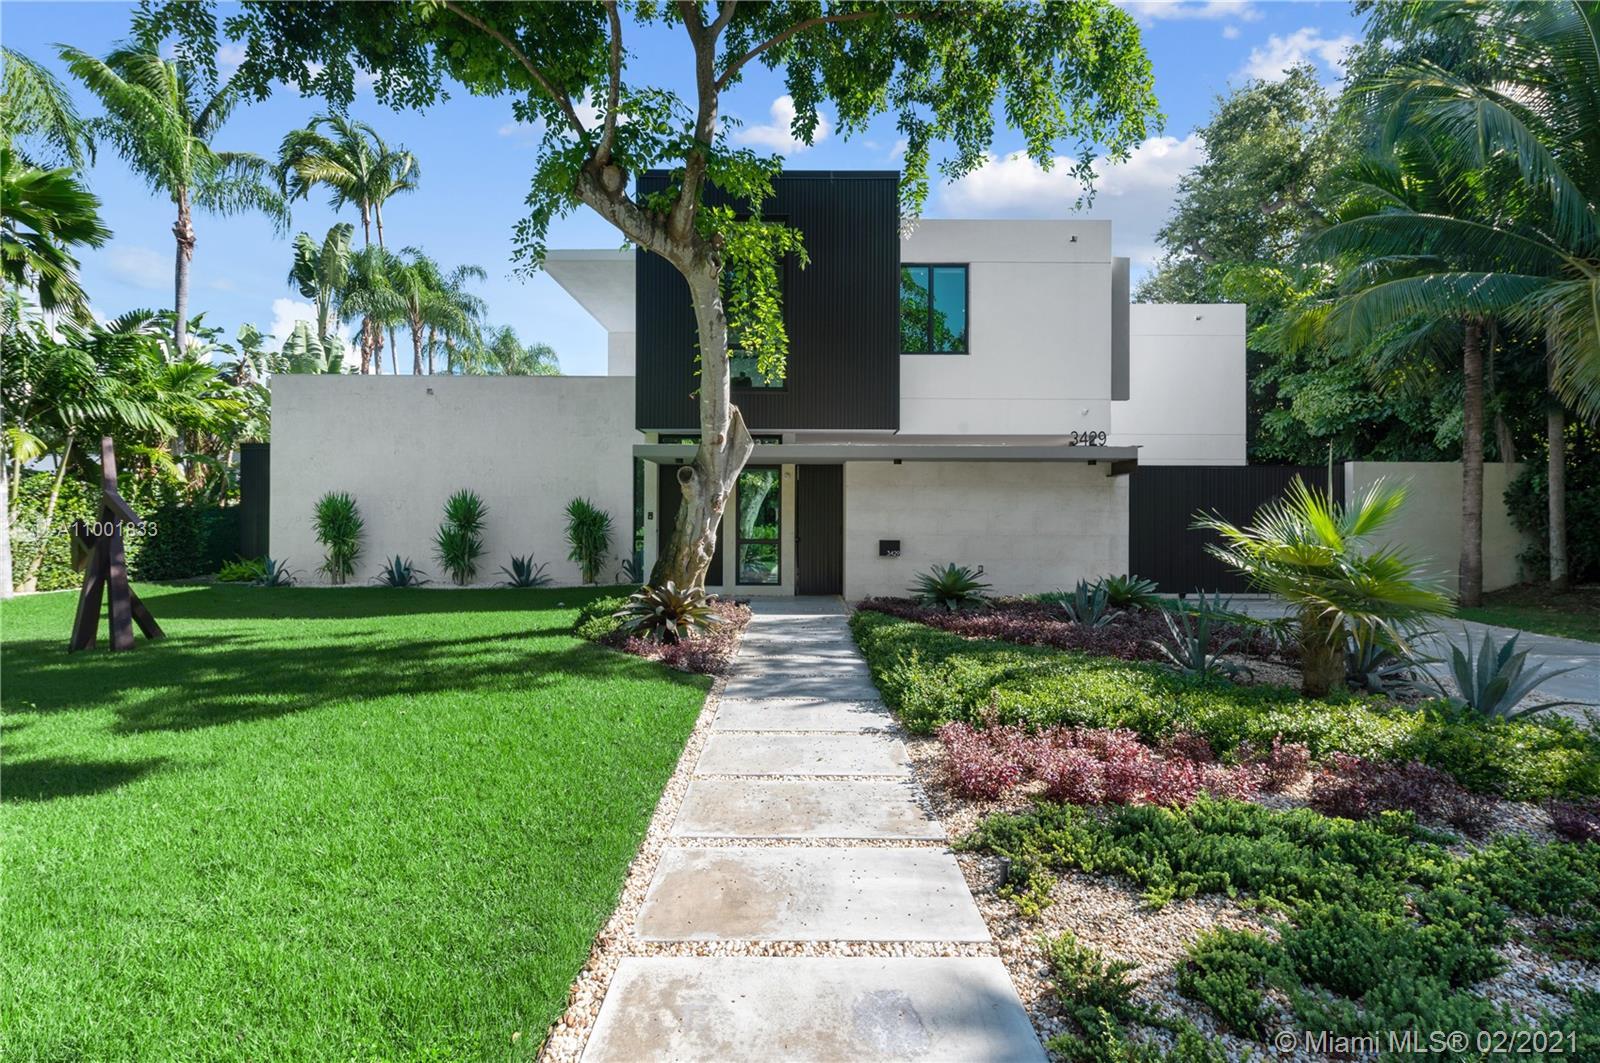 Welcome to the Moorings. This exquisite home was designed by Roney Mateu in a Modern Miami style. New 2019 construction offers effortless 21st-century luxury living & timeless sensibility. Every inch of its 5,936 SF is scaled to full advantage. Sky-high glass walls welcome natural light & frame the lush landscape & 63-ft pool w/waterfall. Marble and oak plank floors throughout. Ultimate Scavolini Italian kitchen w/Gaggenau appliances; sleek baths; full gym; staff suite. The private, gated Moorings enclave boasts 24-hr security & 3 parks within its intimate bayfront confines; from its coveted Main Hwy address walk or bike to top-tier schools, downtown Grove restaurants & shops.